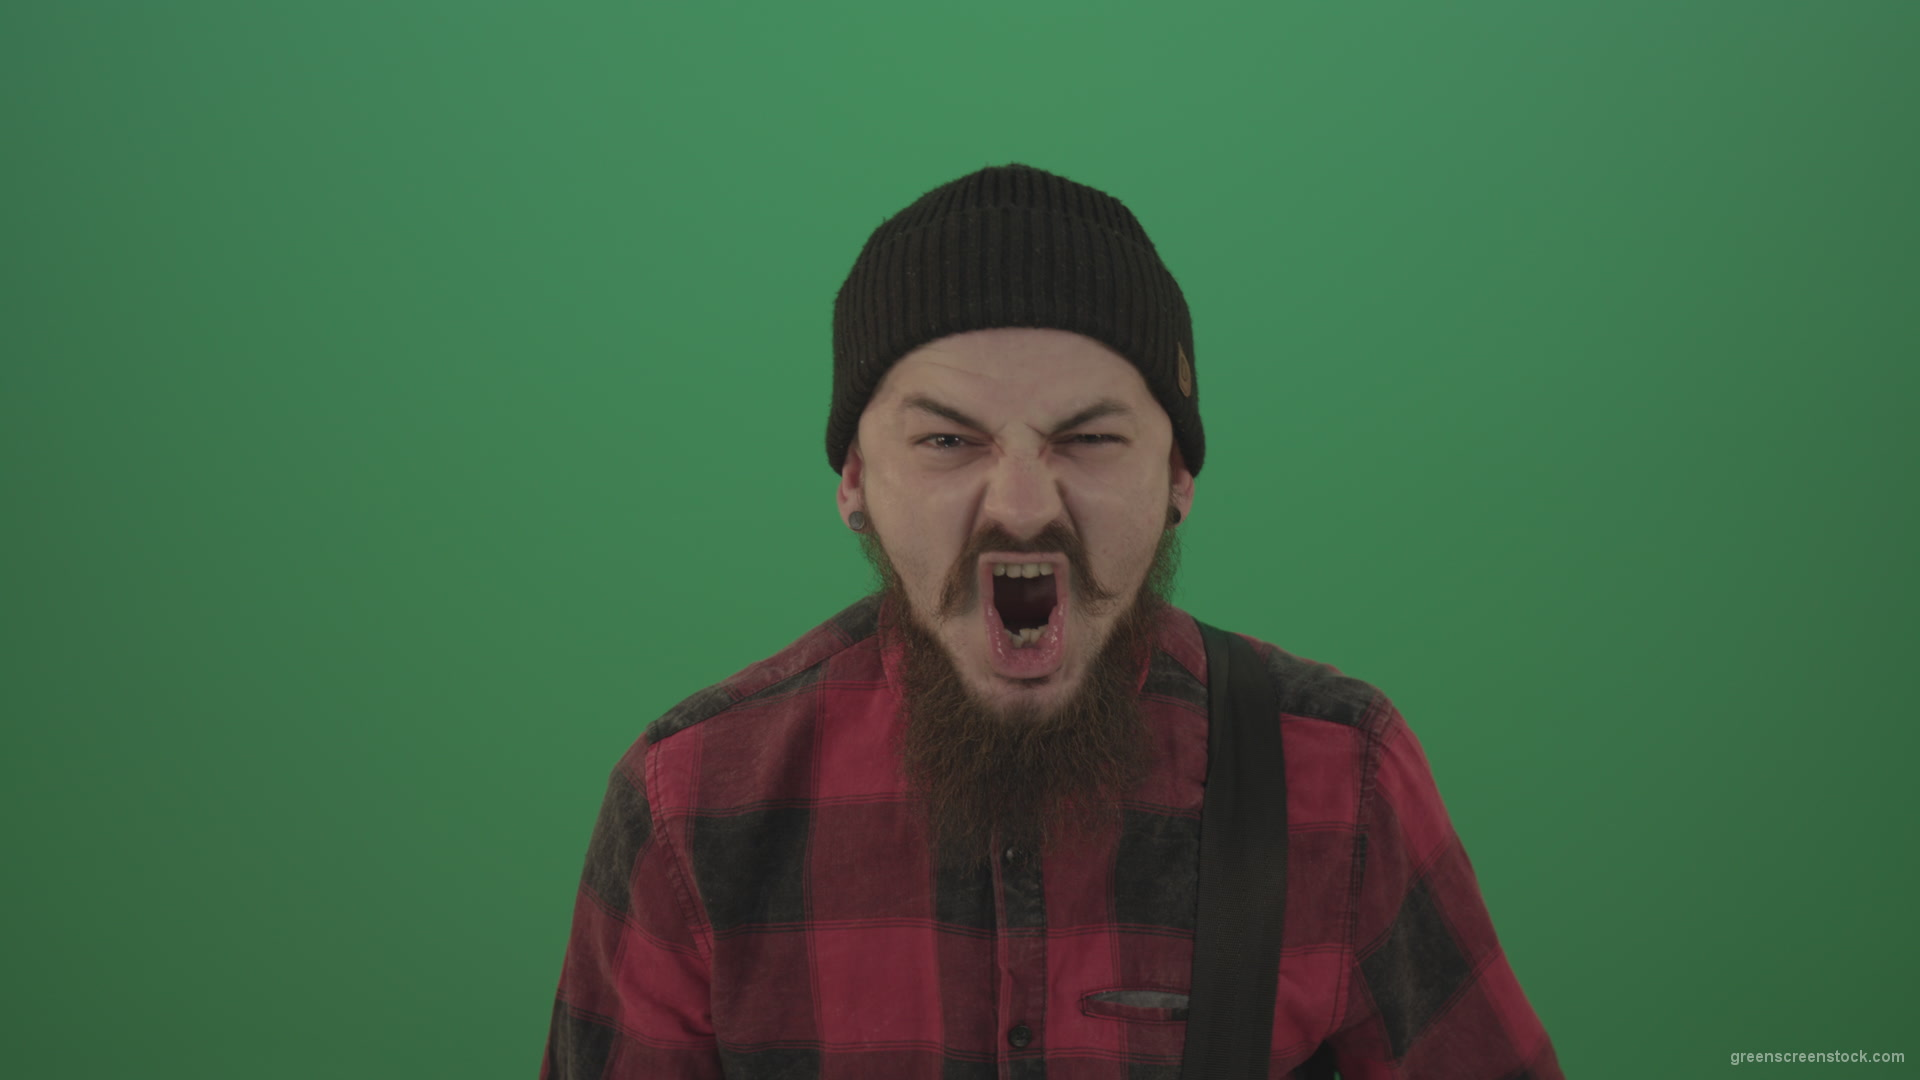 Punk-rocker-man-with-beard-and-red-shirt-screaming-feels-pain-isolated-on-green-screen-background_009 Green Screen Stock